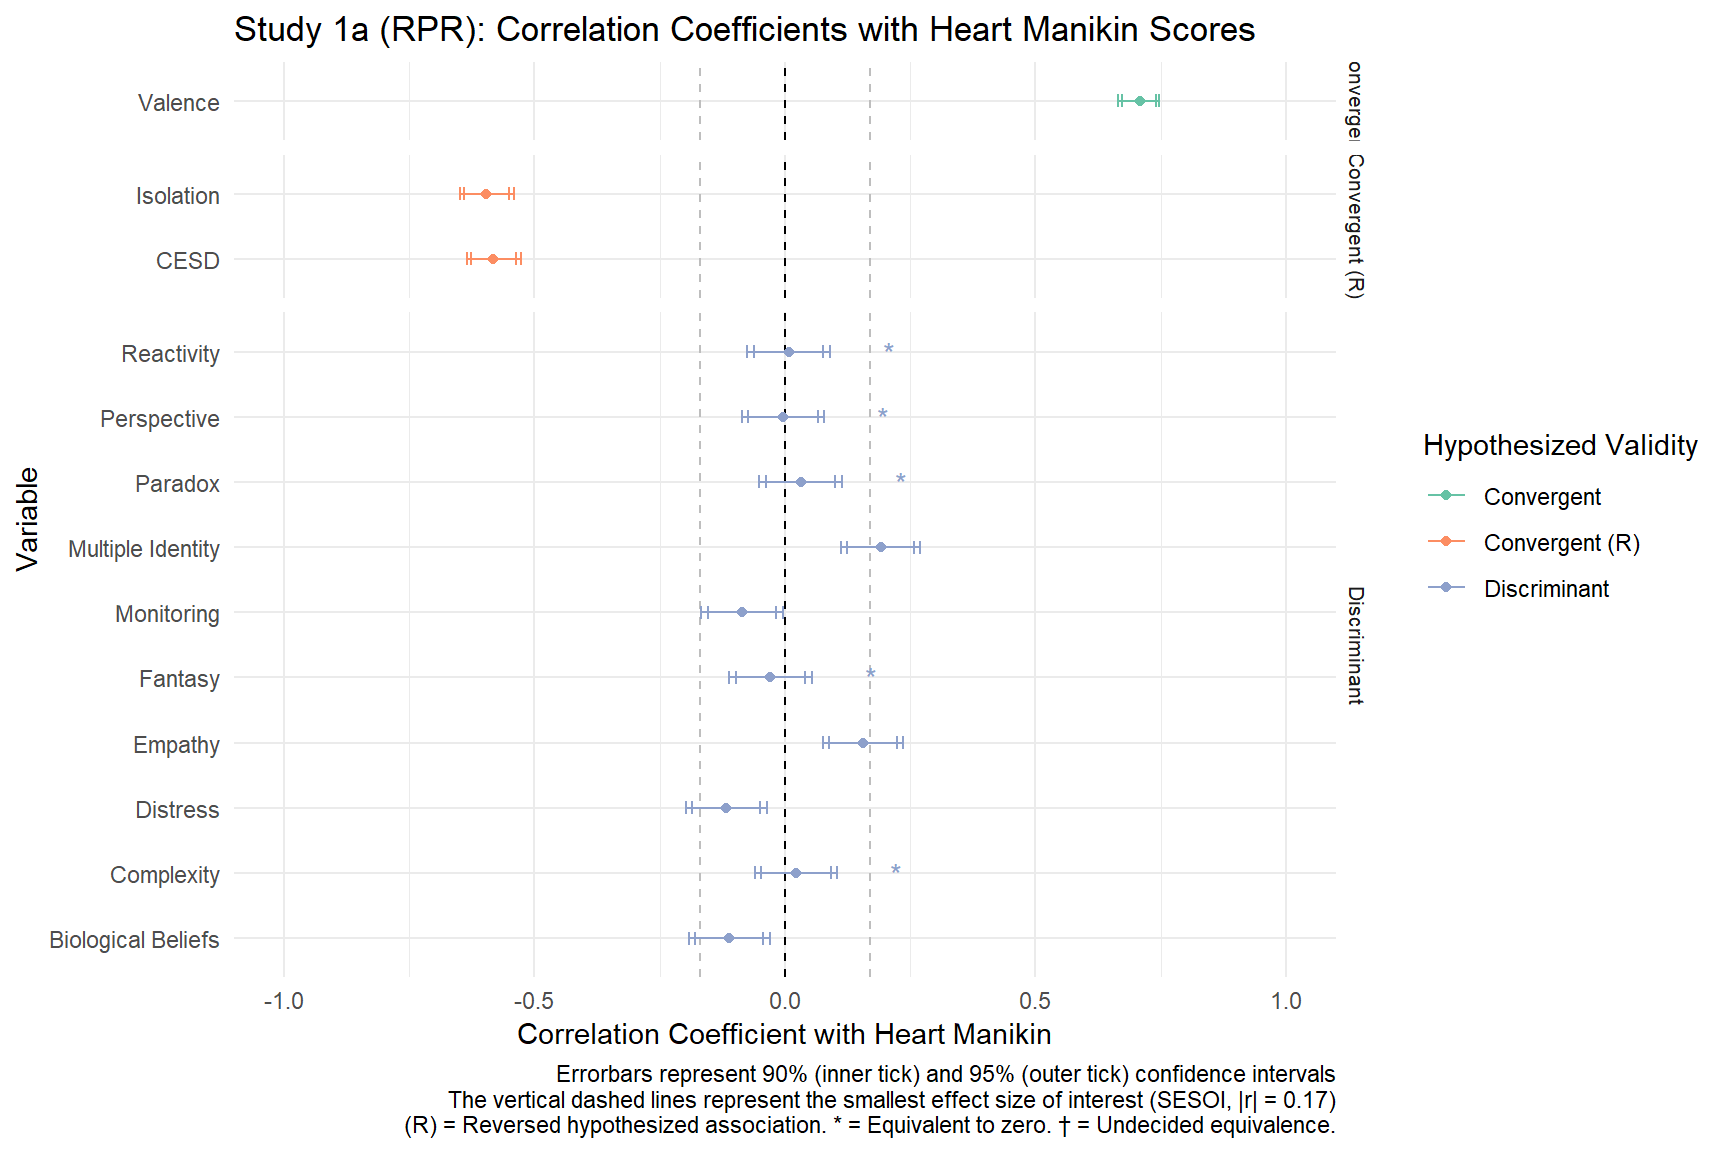 Study 1a - Forestplot Showing Correlation Coefficients with Heart Manikin Scores.